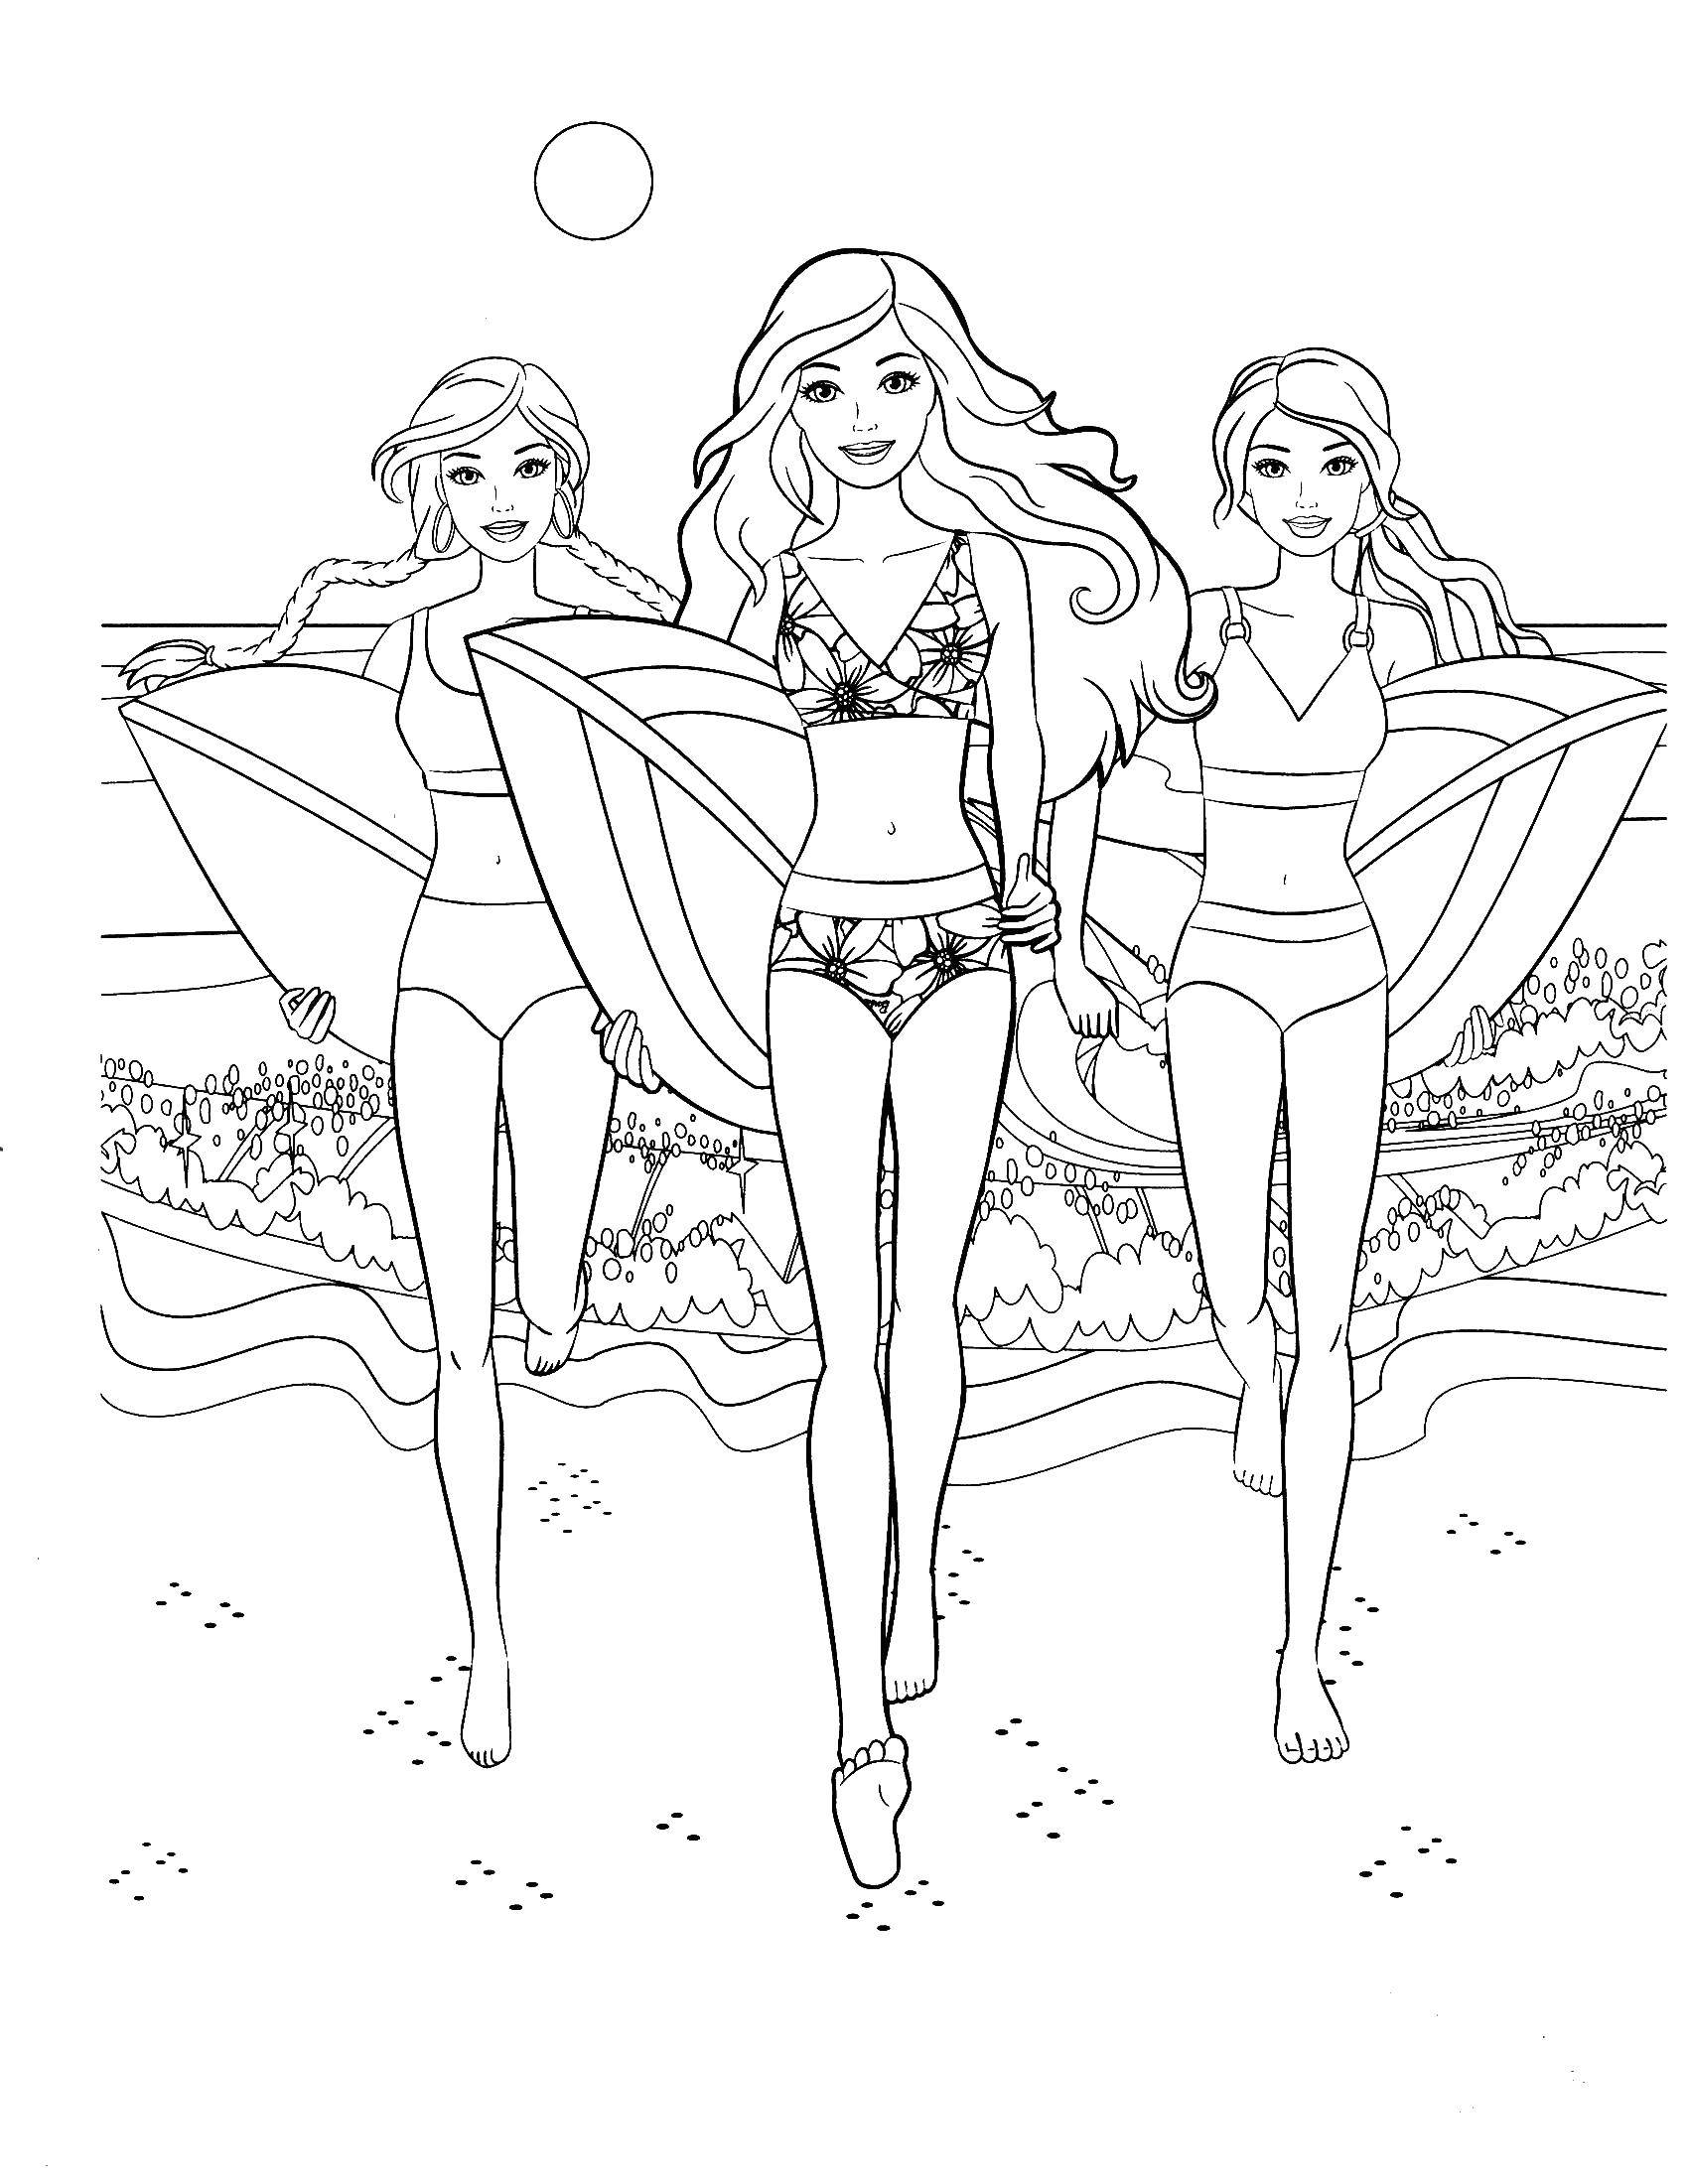 Coloring Barbie and her friends surfers. Category Barbie . Tags:  Barbie , beach.